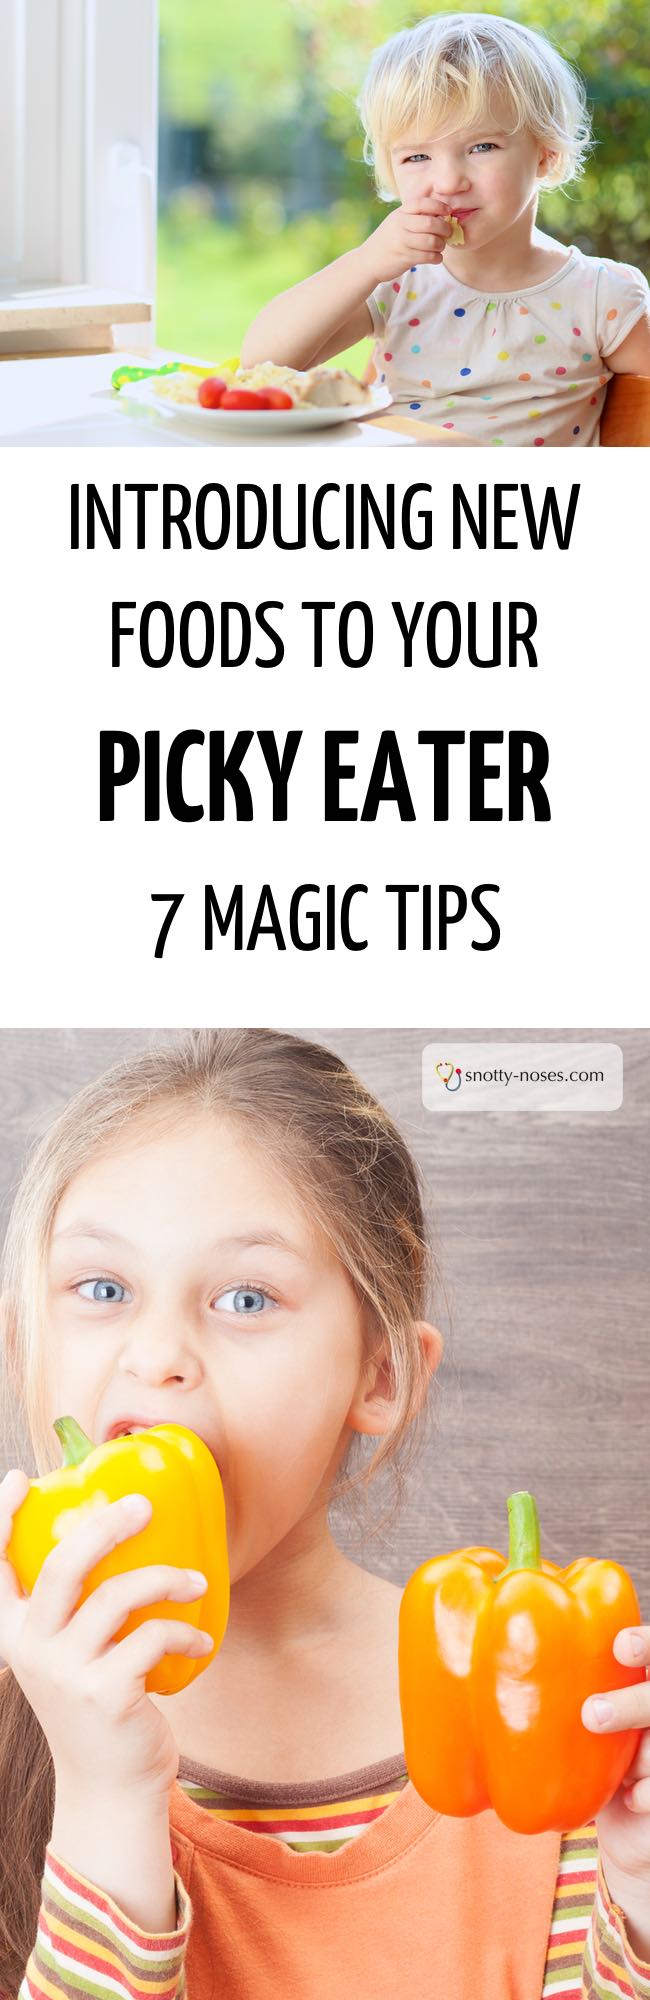 Introducing new foods to your picky or fussy eater. 7 magic tips to make introducing new foods successful.